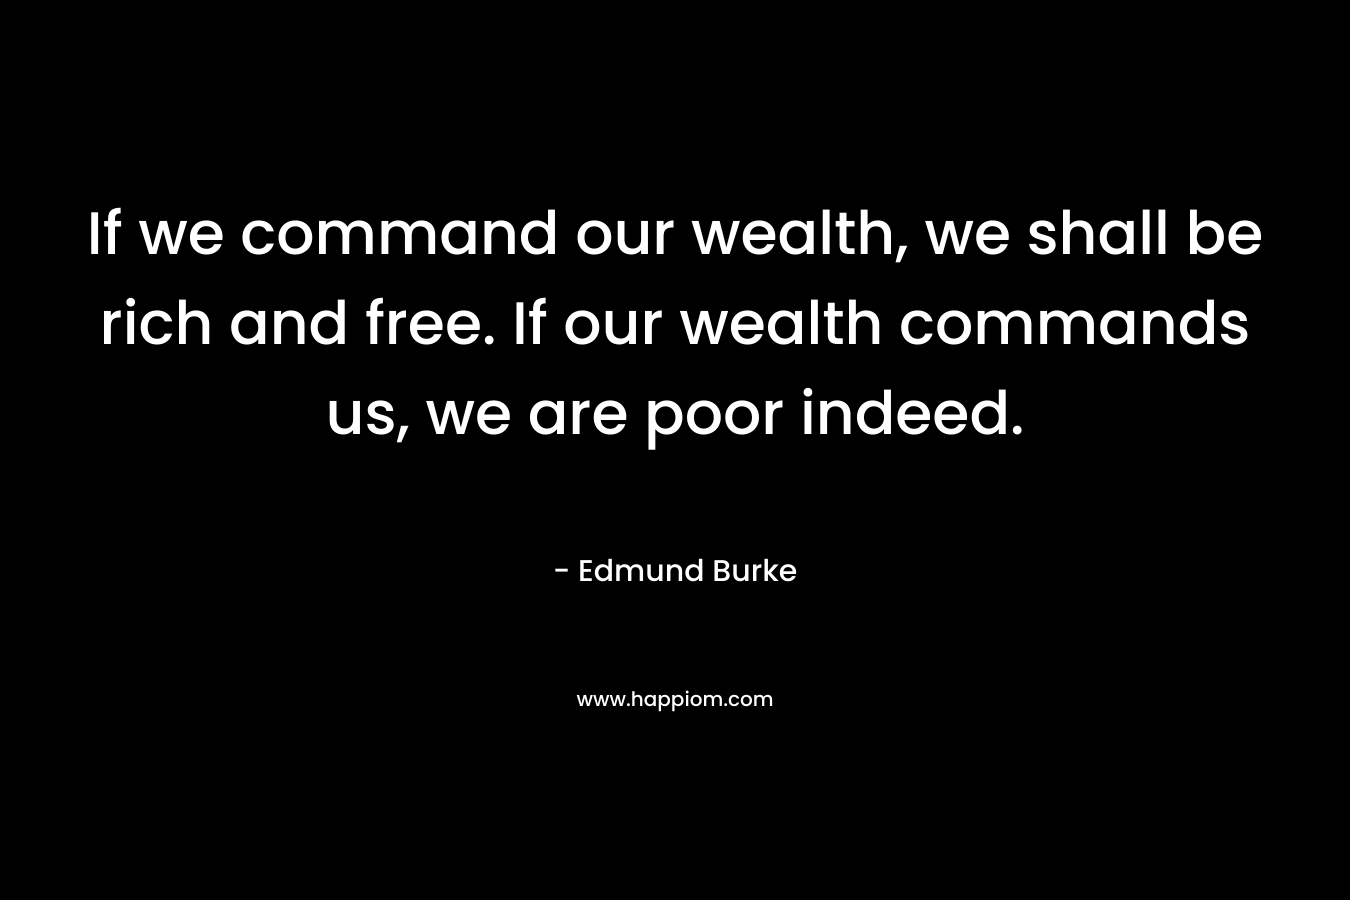 If we command our wealth, we shall be rich and free. If our wealth commands us, we are poor indeed.